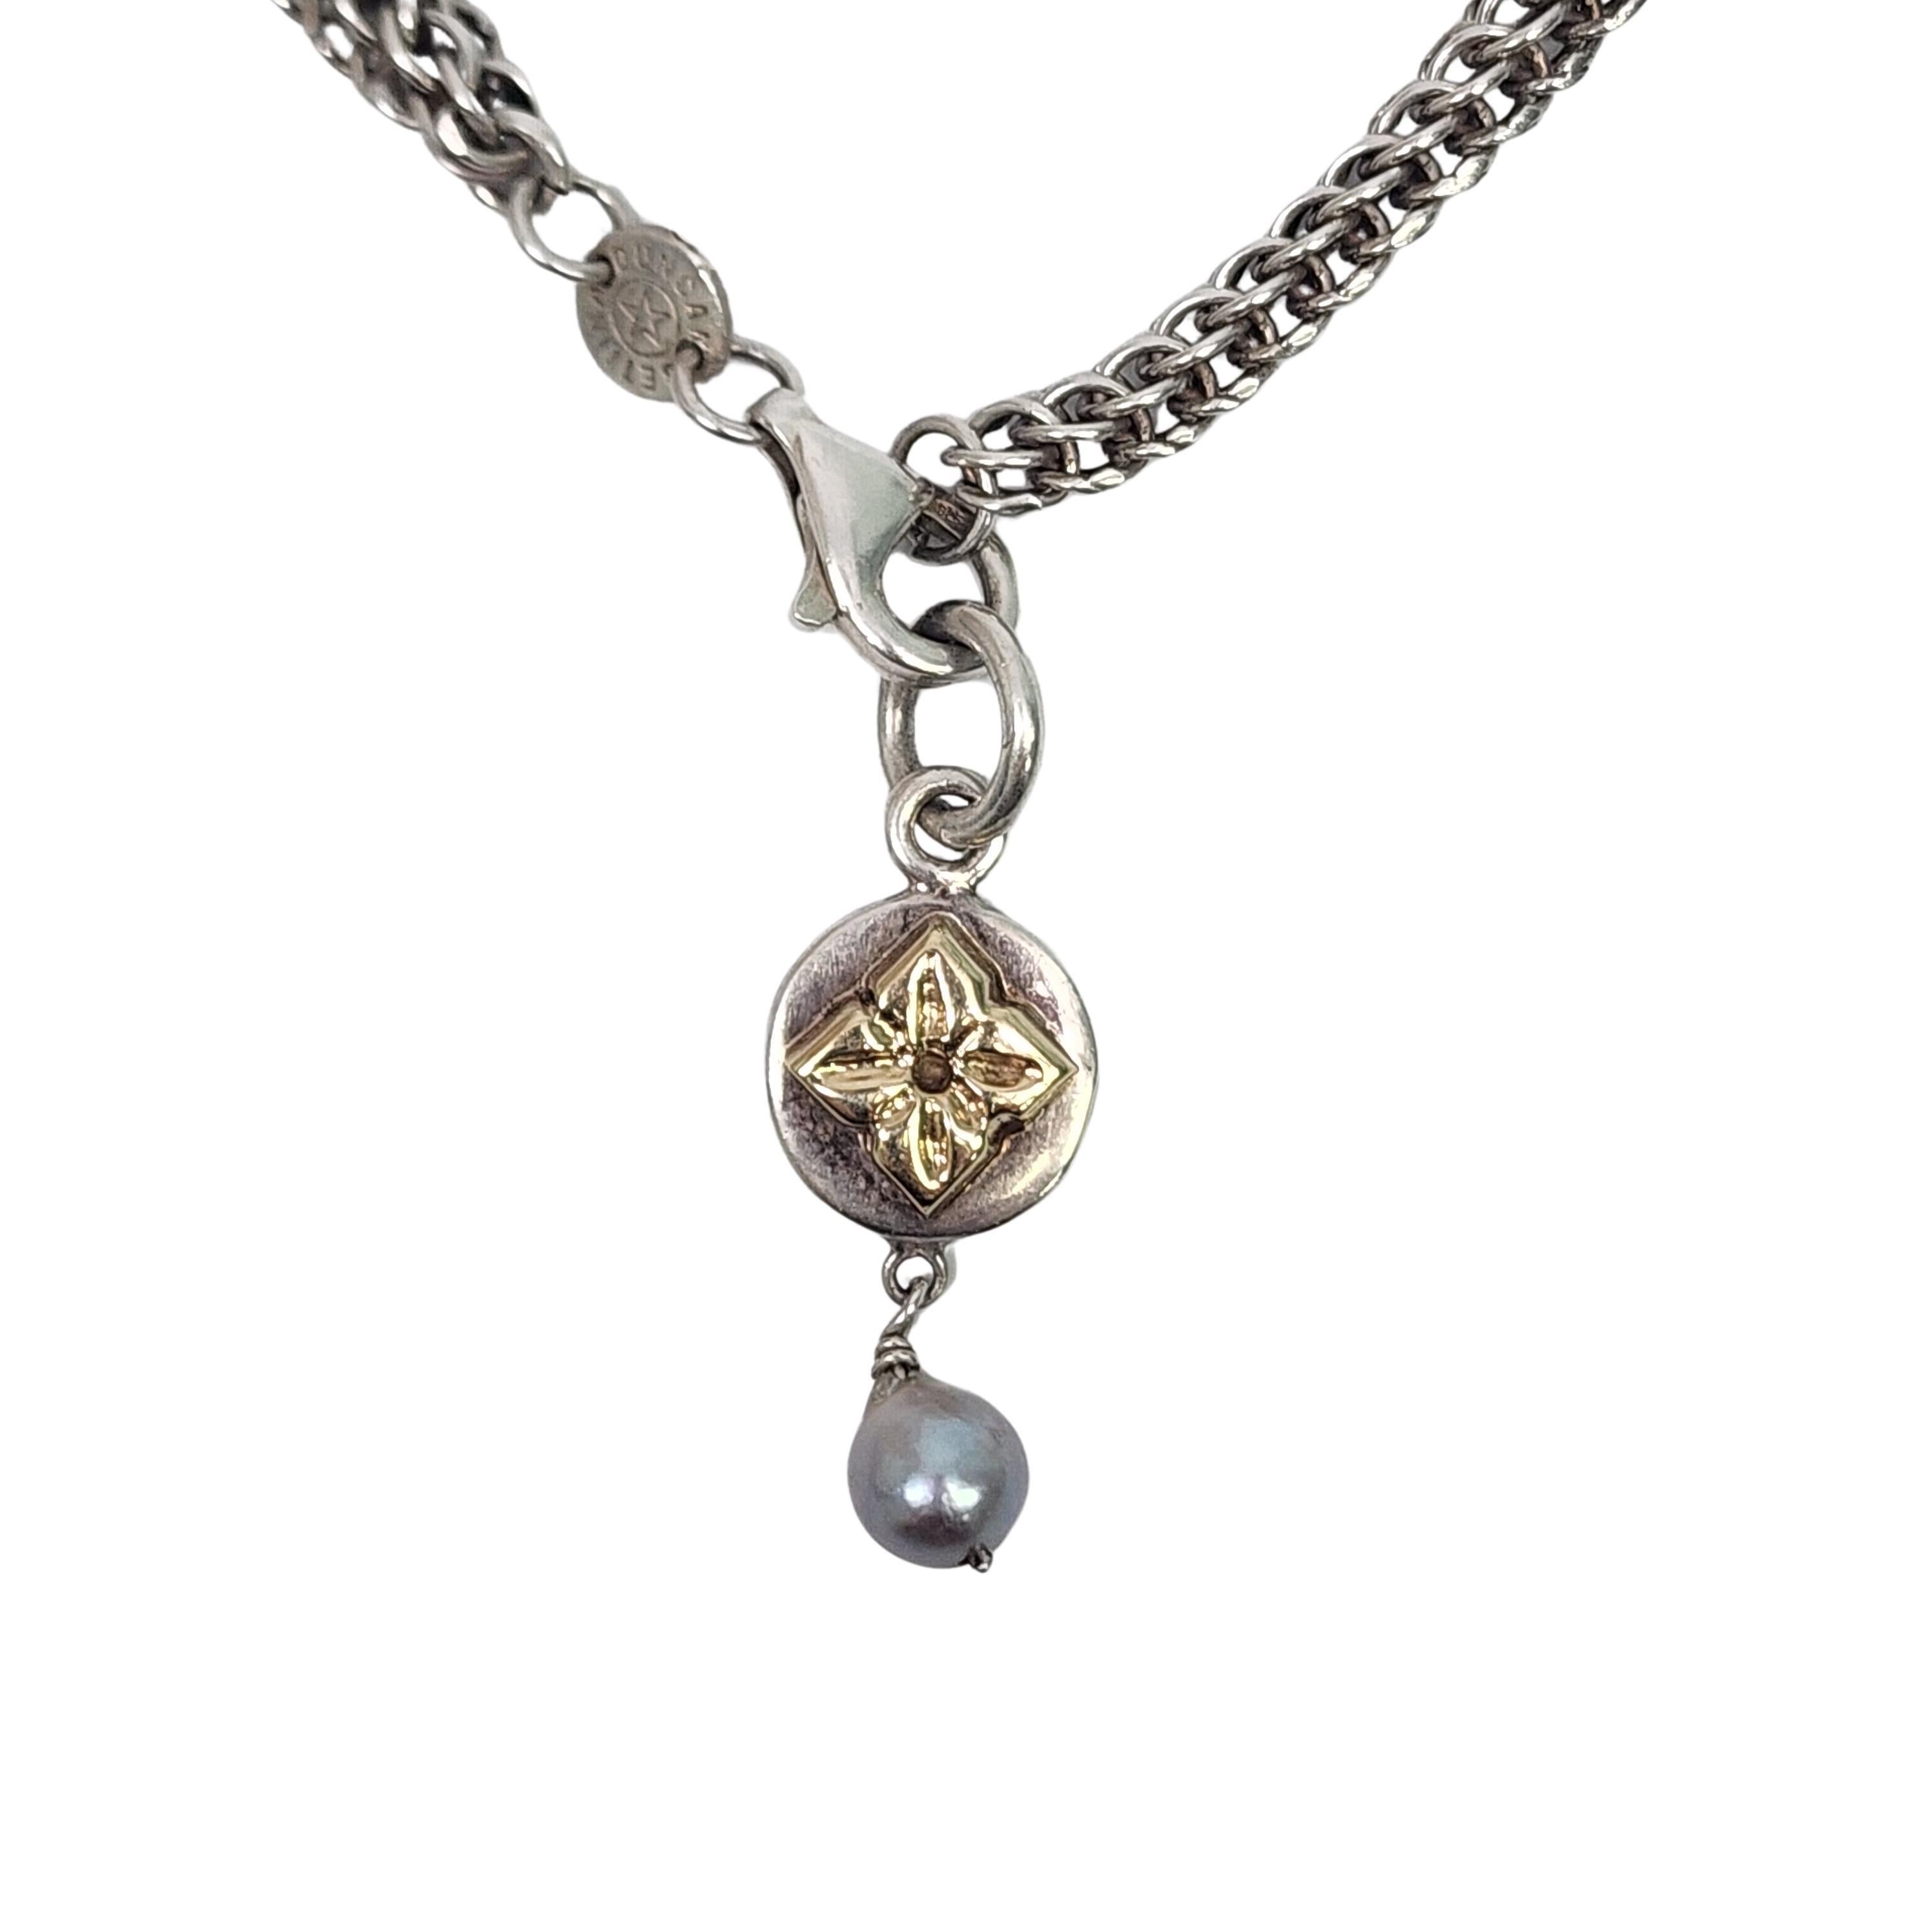 Sterling silver and yellow gold flower pearl pendant wheat chain necklace by Bettina Duncan.

A sterling silver pendant featuring a yellow gold flower and dangling grey pearl hangs from a thick sterling silver wheat chain.

Weighs approx 24.1g,